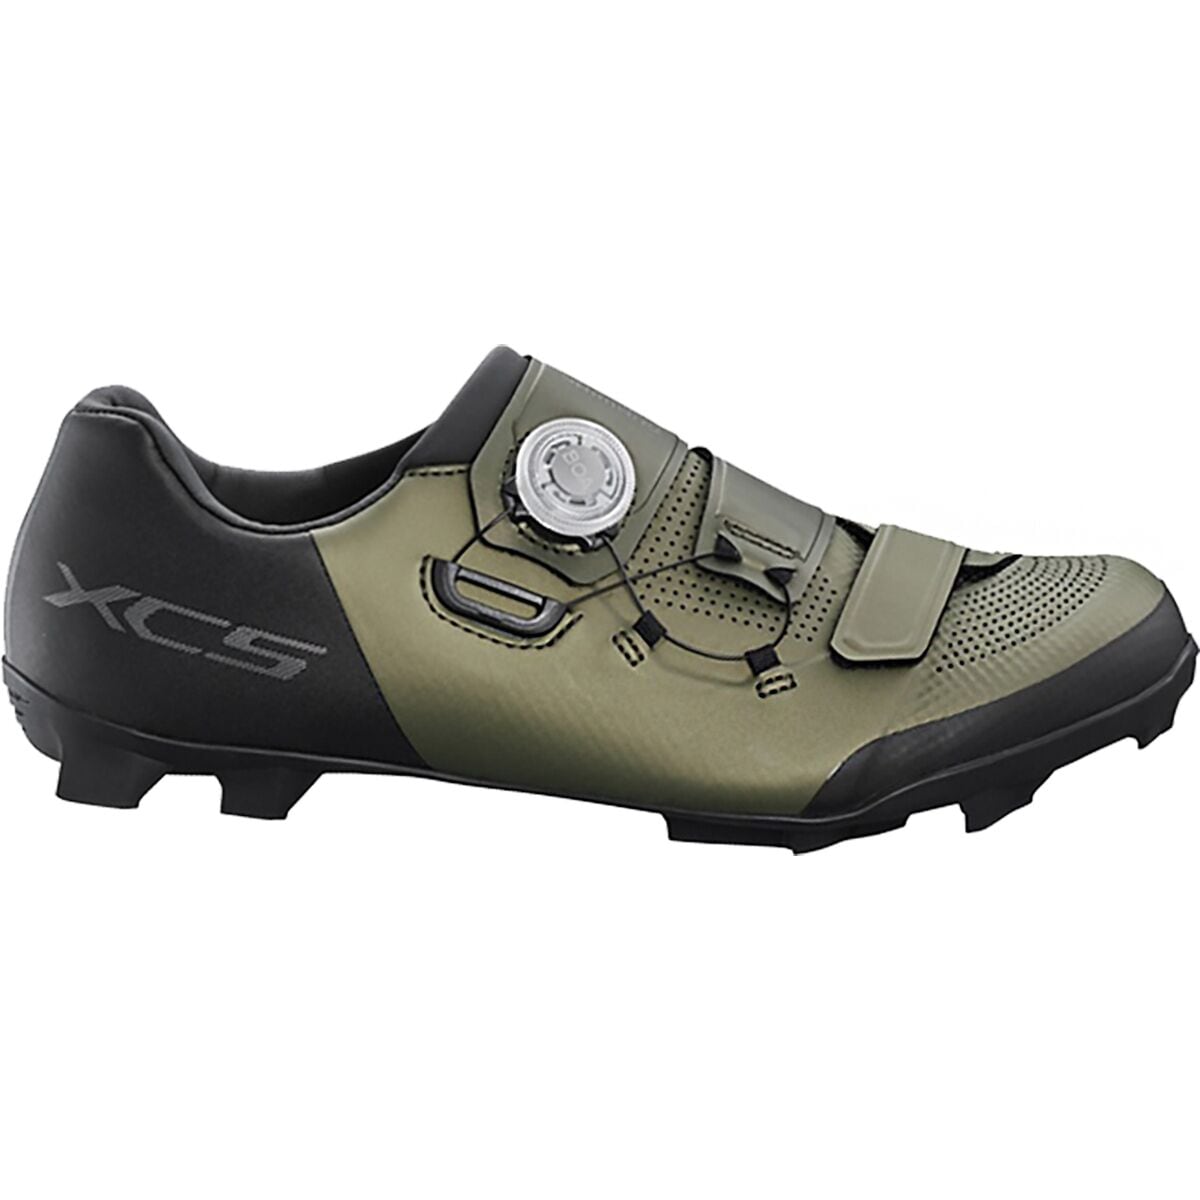 Shimano XC502 Wide Limited Edition Cycling Shoe - Men's